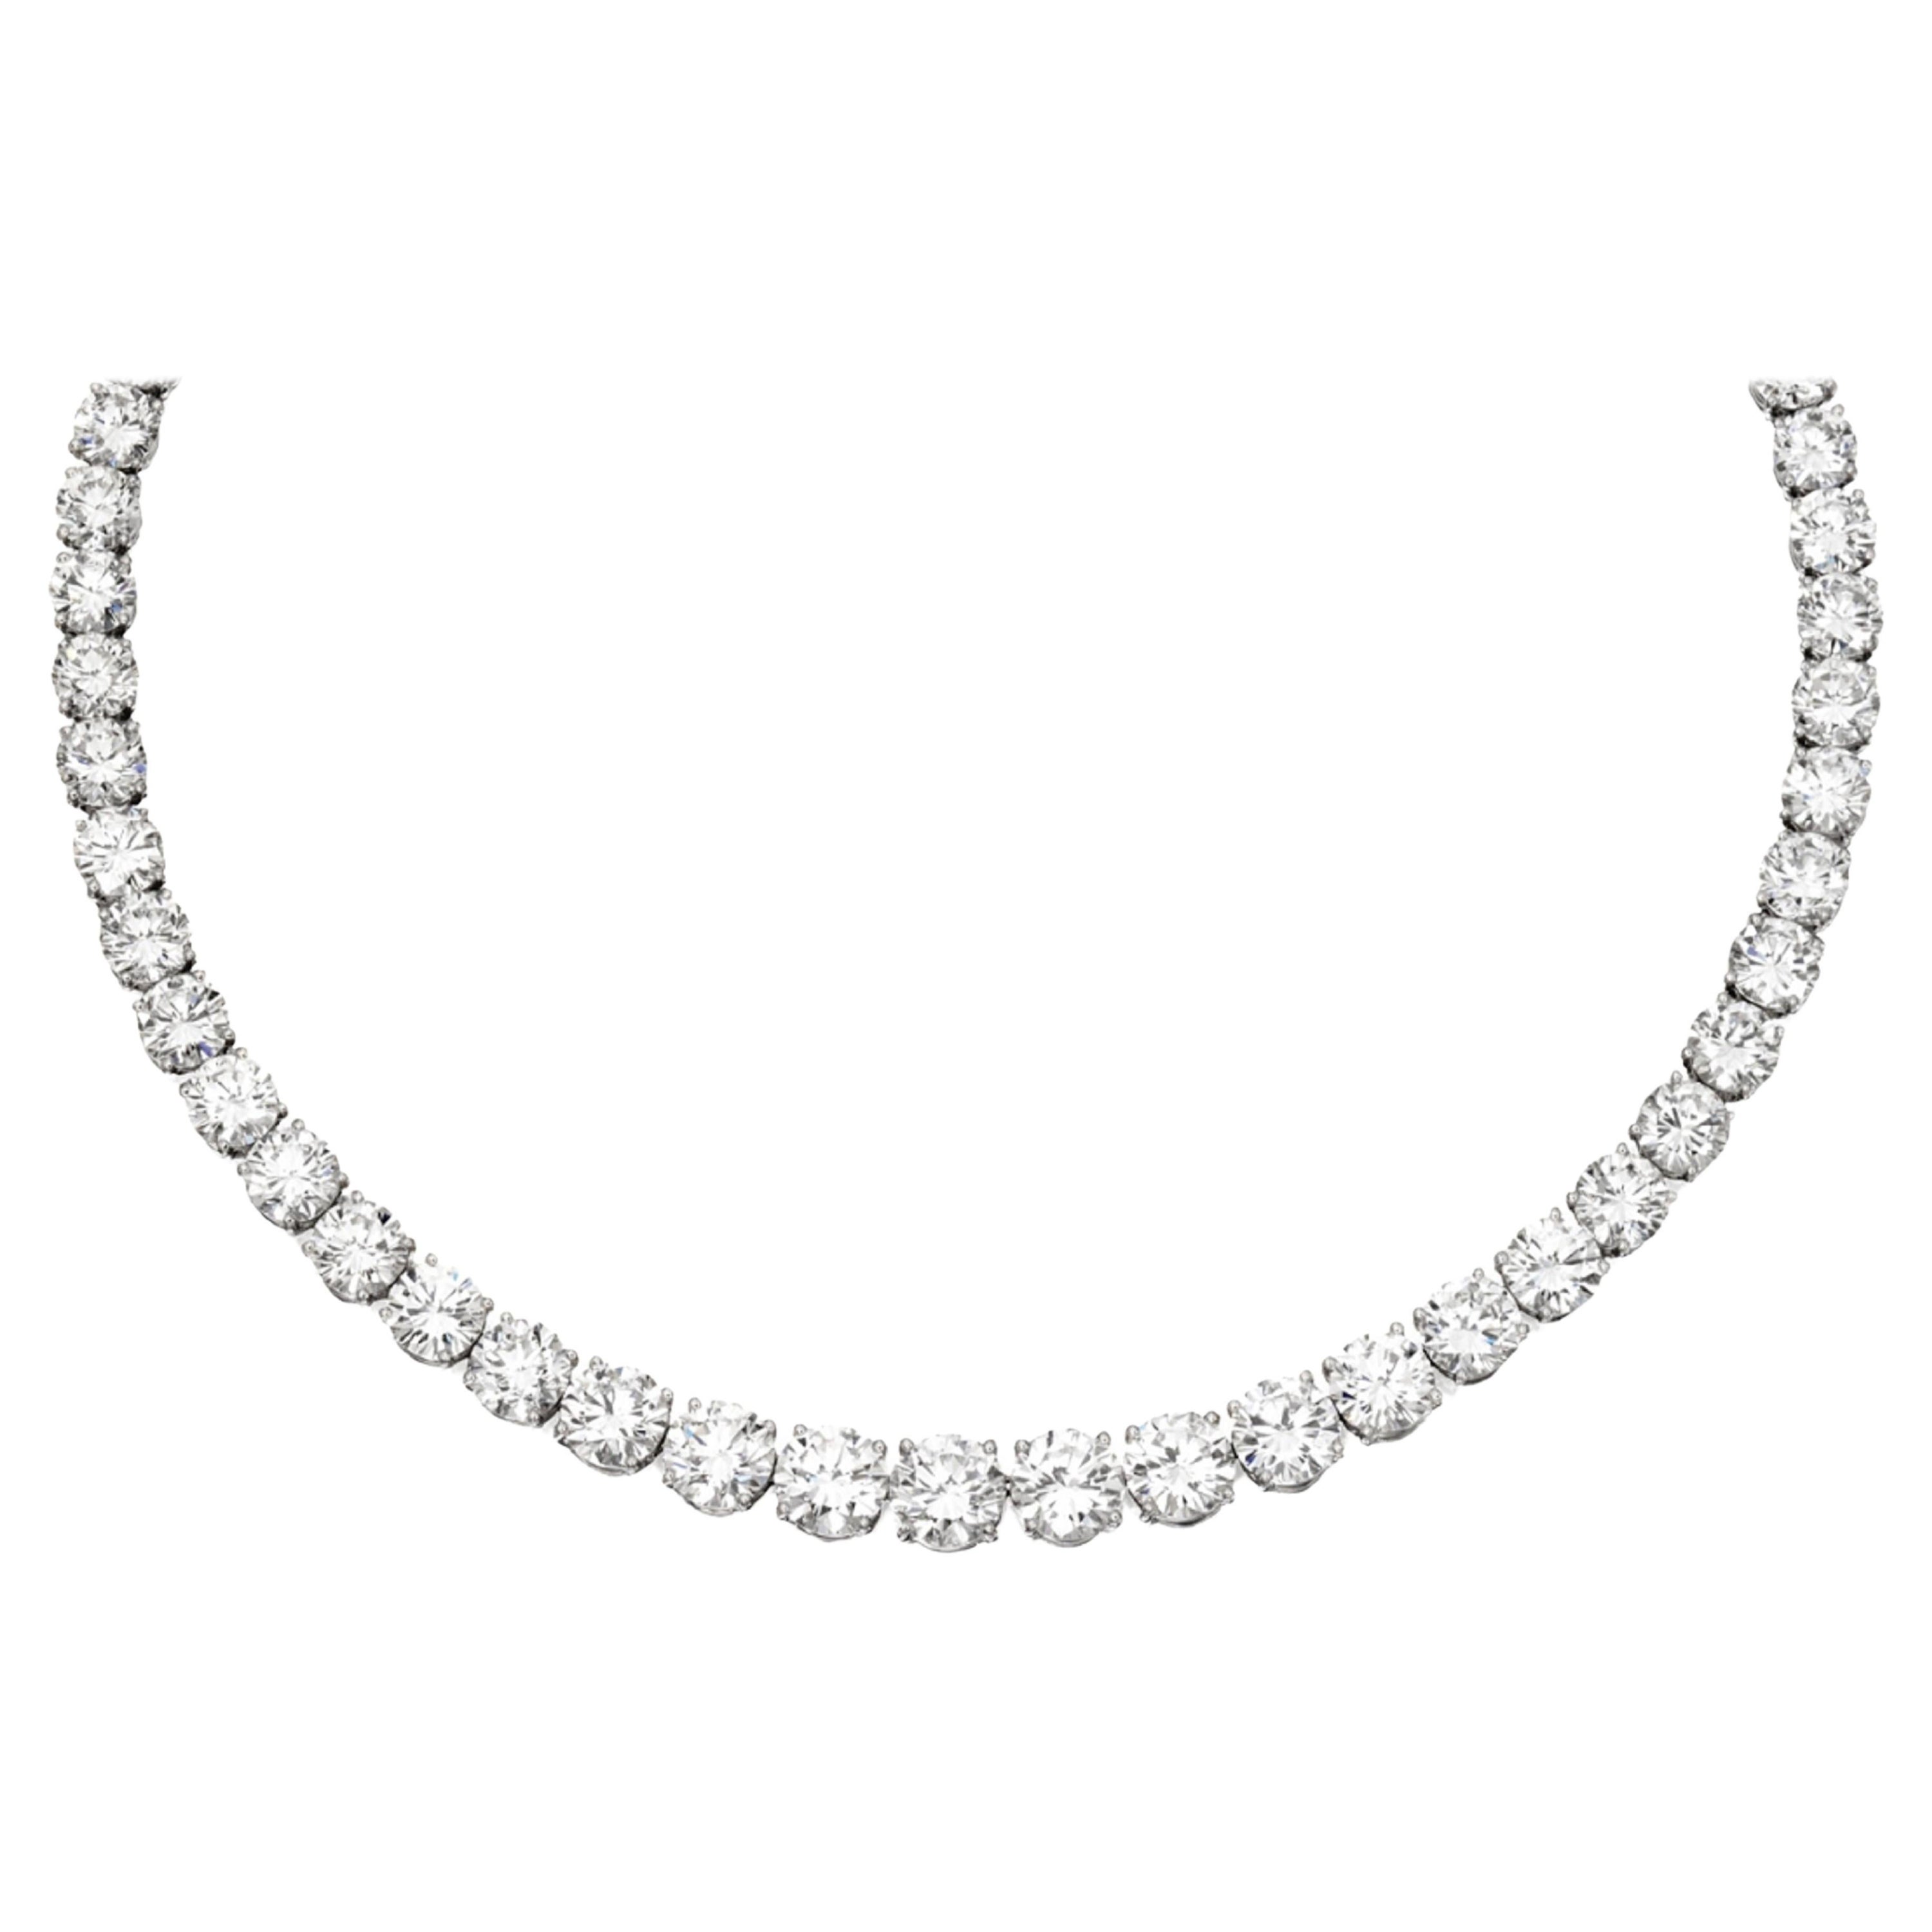  breathtaking Four-Prong 25 CT TW Natural Diamond Full Tennis Necklace, meticulously crafted to grace the neckline with unparalleled brilliance and sophistication.

Expertly fashioned from shimmering 18K white gold, this necklace showcases a